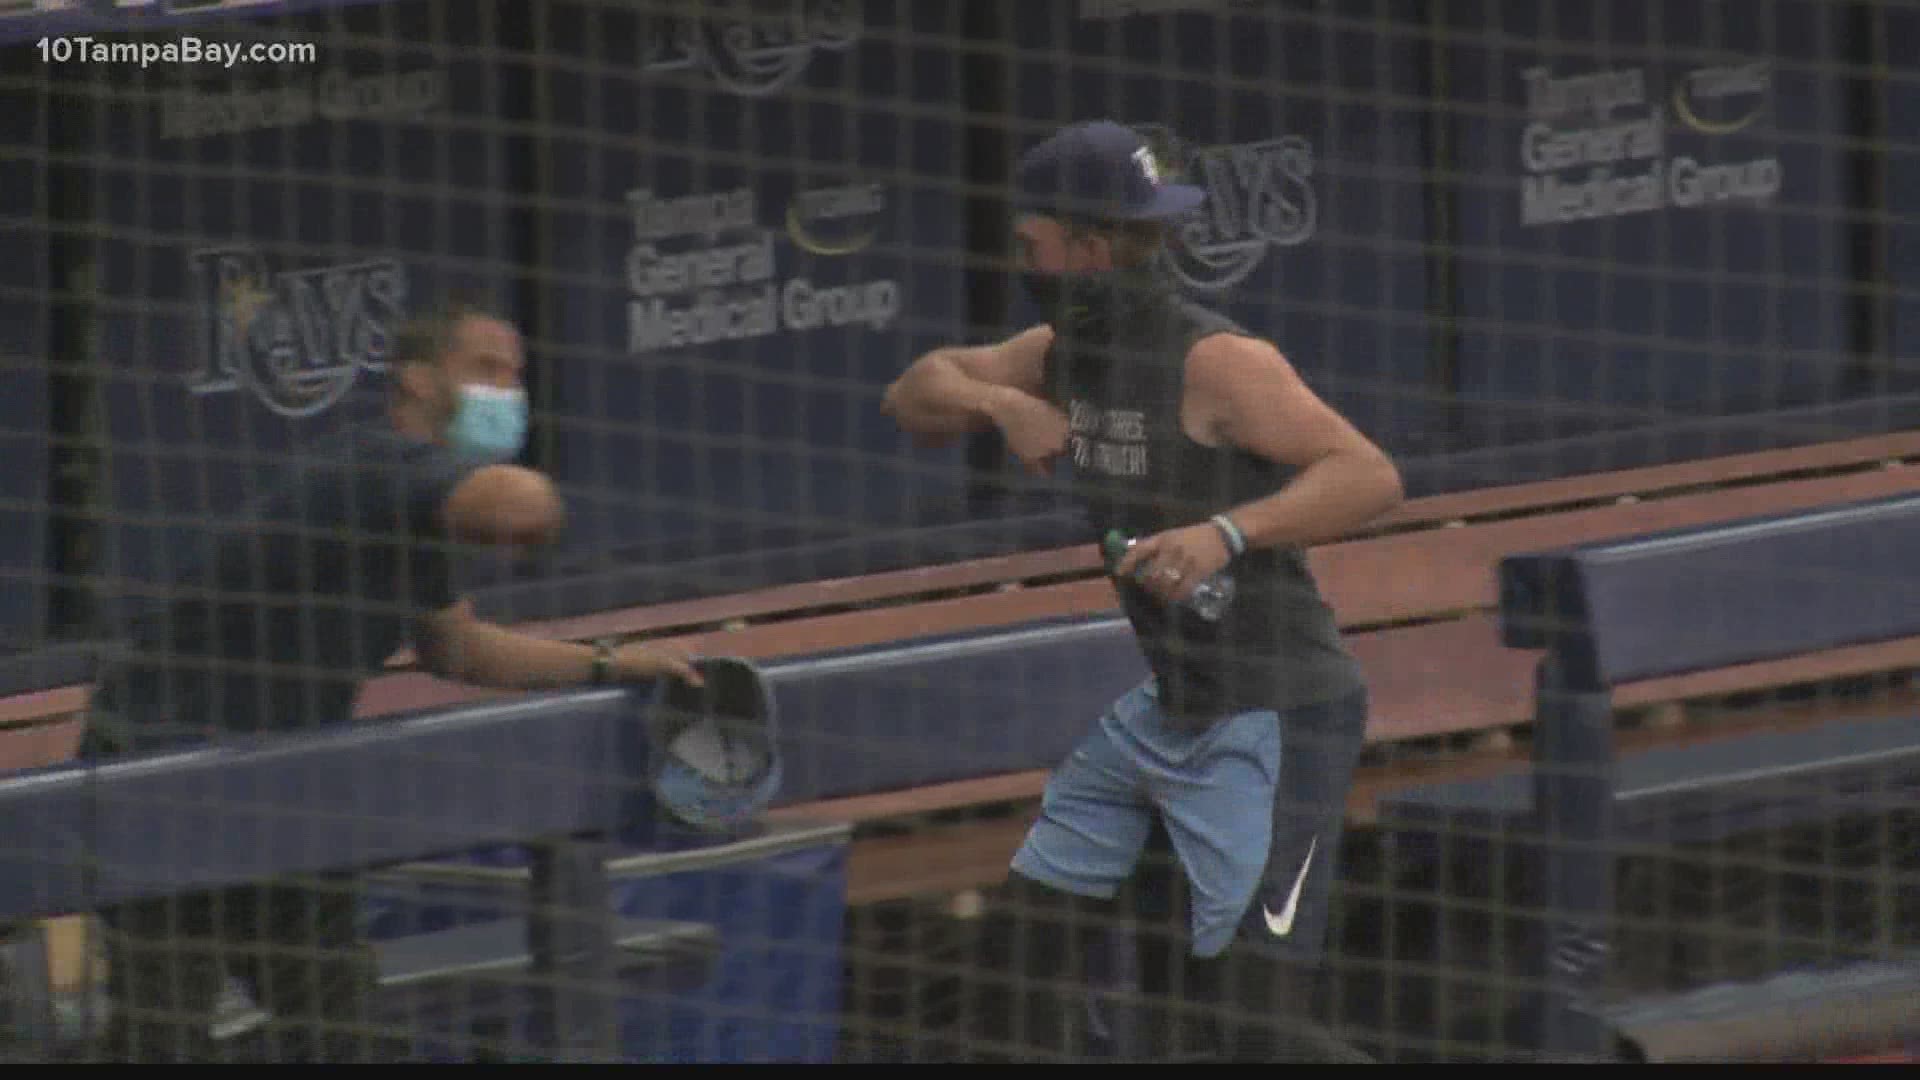 The Tampa Bay Rays officially started training back up for the 2020 season.